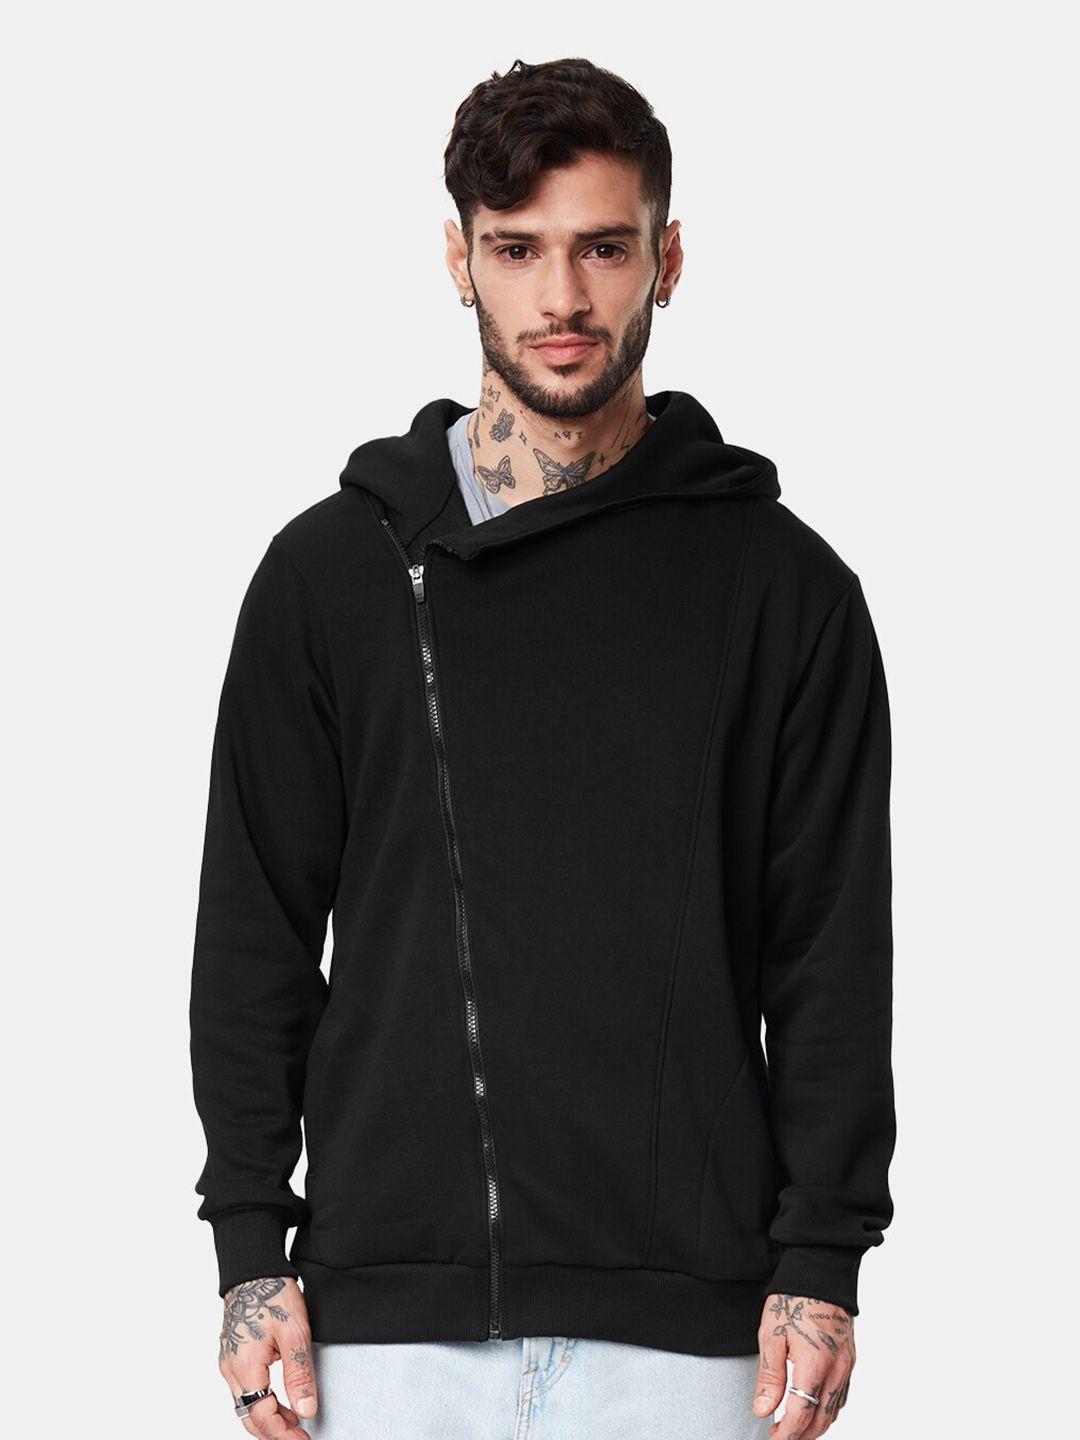 the souled store men hooded cotton sweatshirt